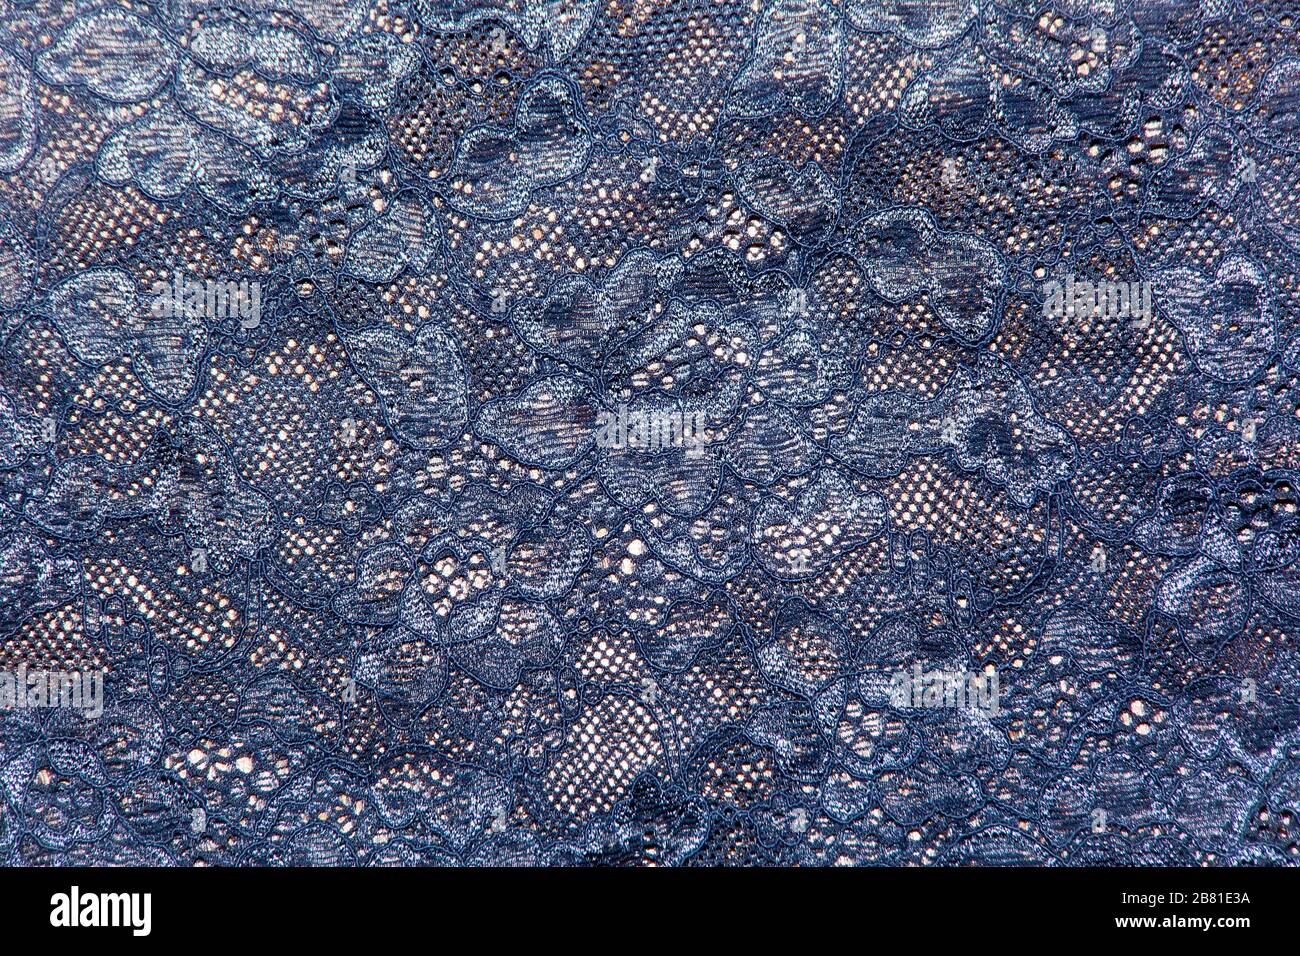 image lace on fabric vegetable openwork background in blue Stock Photo